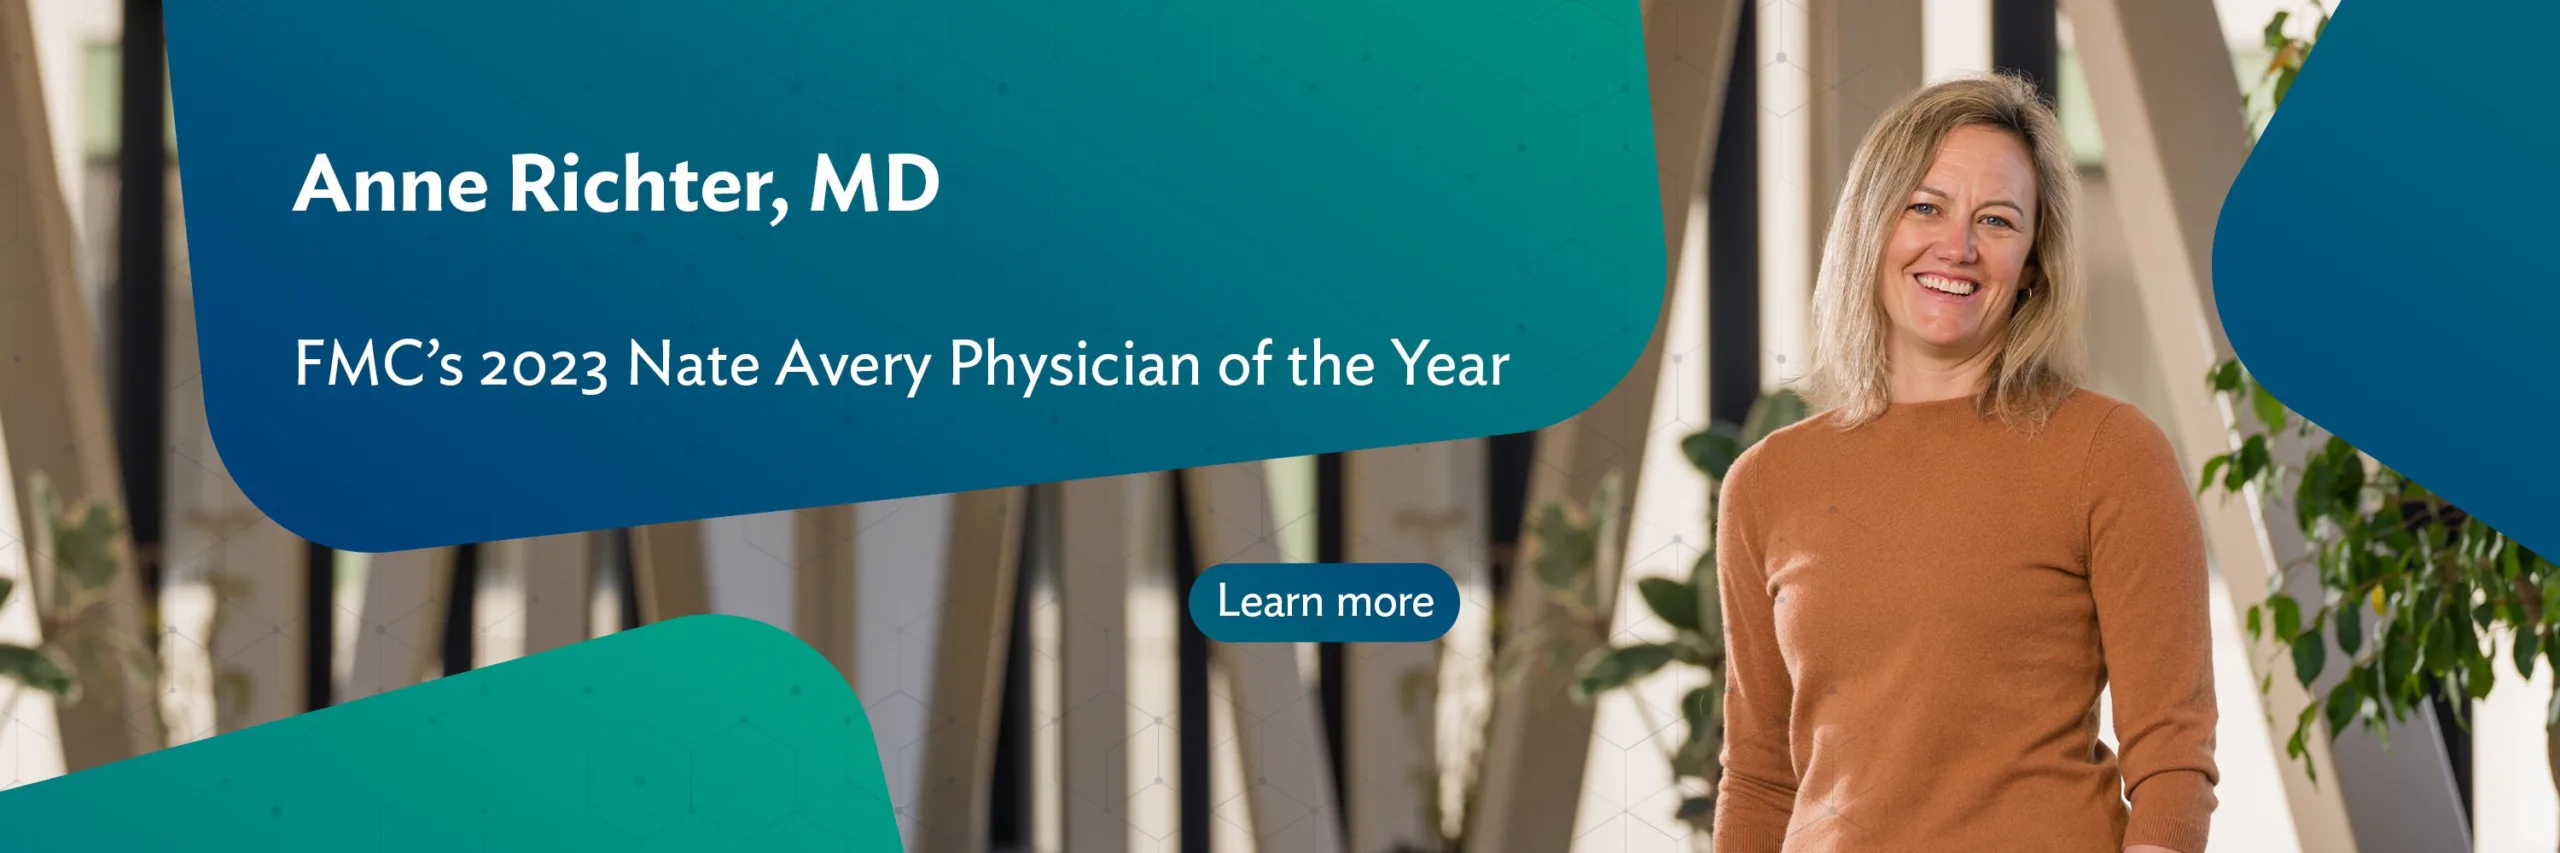 Anne Richter, MD
FMC's 2023 Nate Avery Physician of the Year